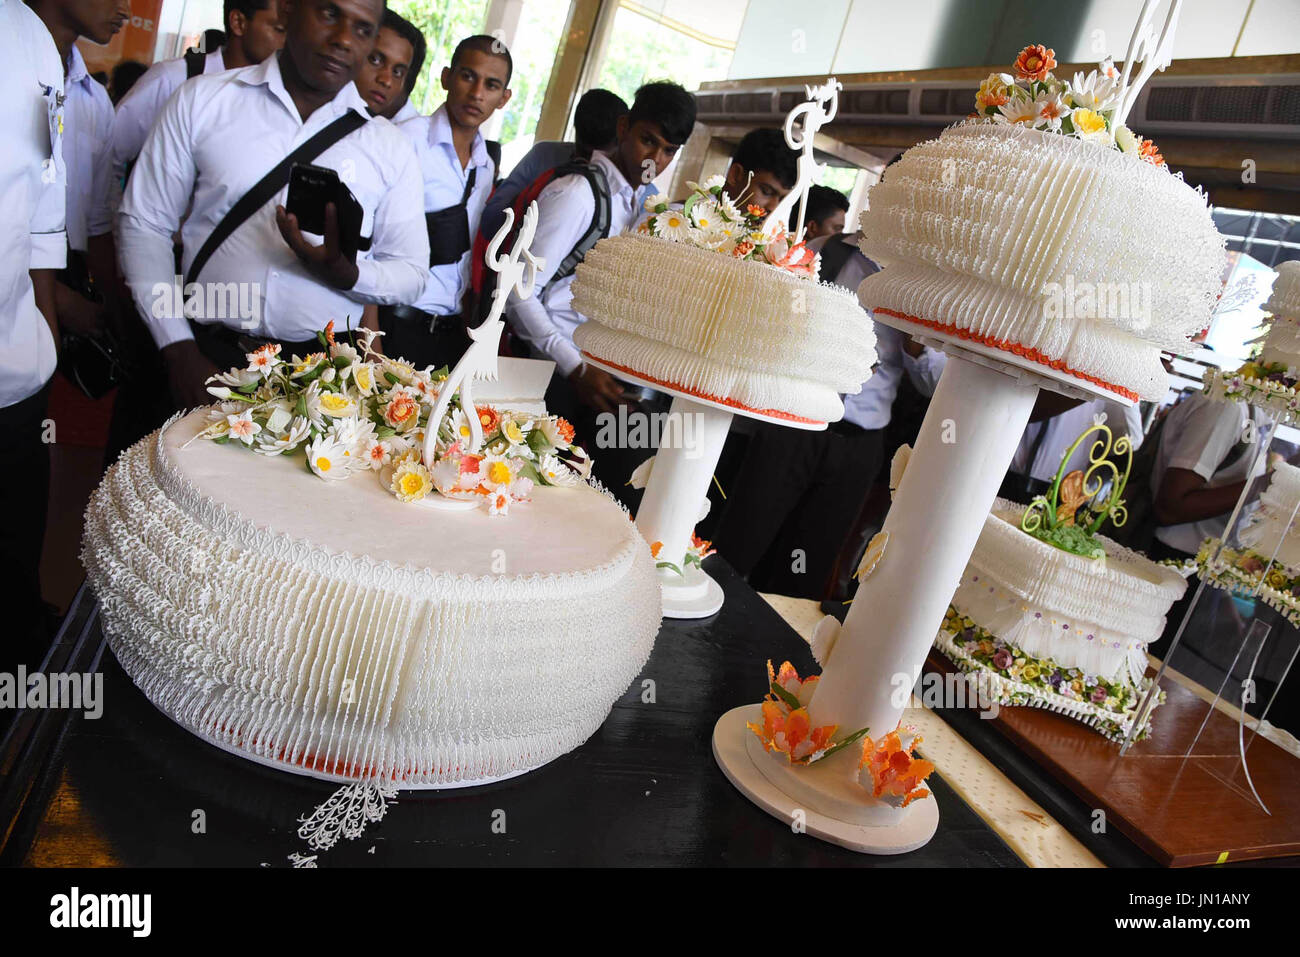 Colombo. 28th July, 2017. Delicate cuisines are displayed in the 'Culinary Art and Food Expo' in Colombo, Sri Lanka on July 28, 2017. The 17th edition of the 'Culinary Art and Food Expo', organized by the chefs' Guild of Lanka, was launched in the Bandaranaike Memorial International Conference Hall in Colombo on Friday. Credit: Gayan sameera/Xinhua/Alamy Live News Stock Photo